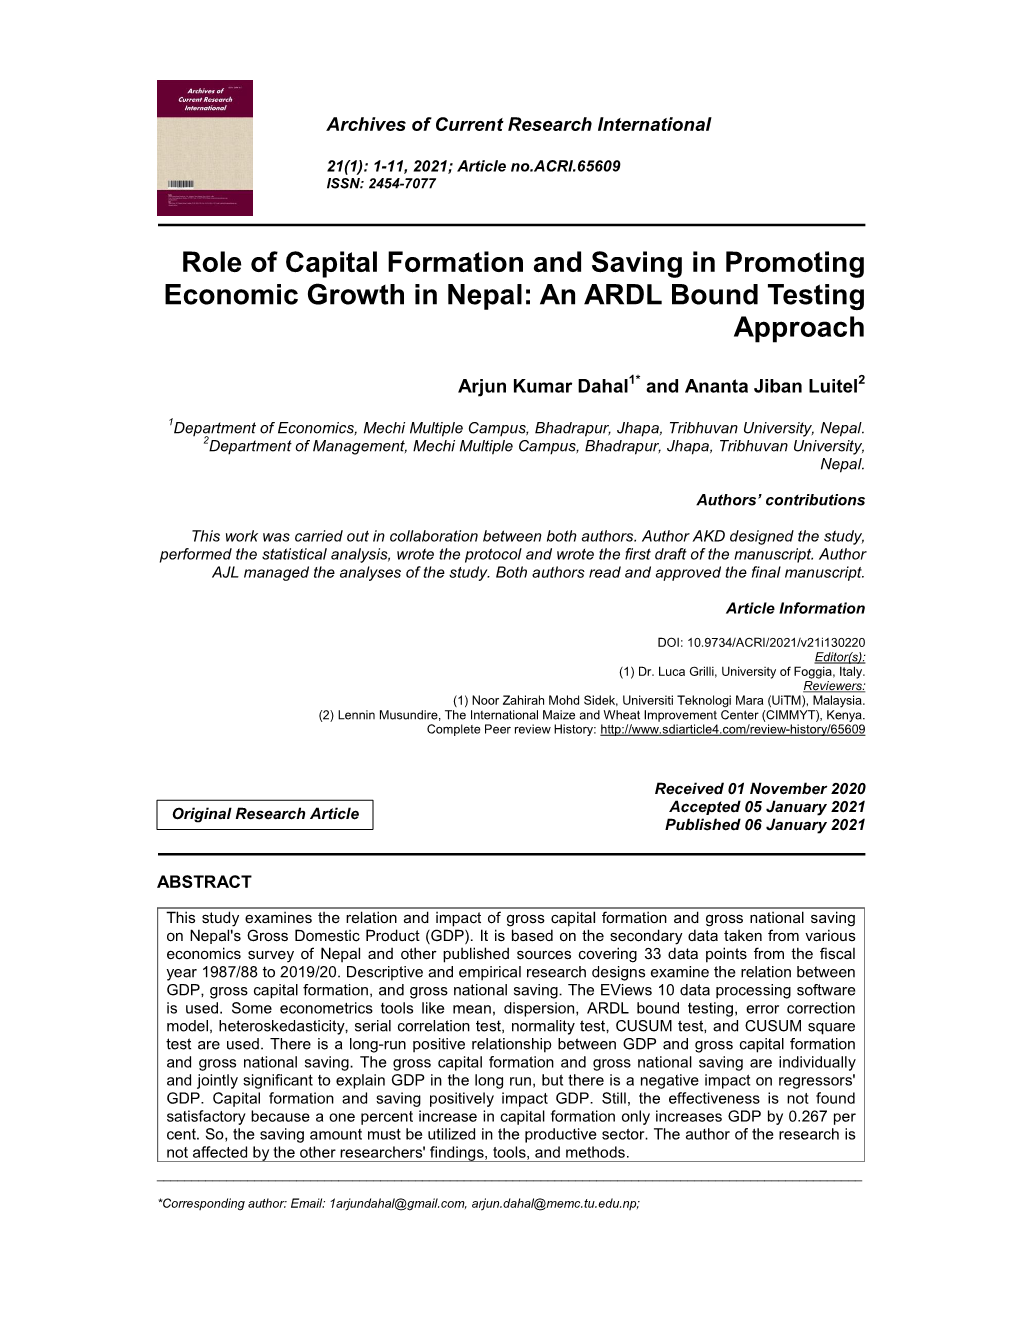 Role of Capital Formation and Saving in Promoting Economic Growth in Nepal: an ARDL Bound Testing Approach